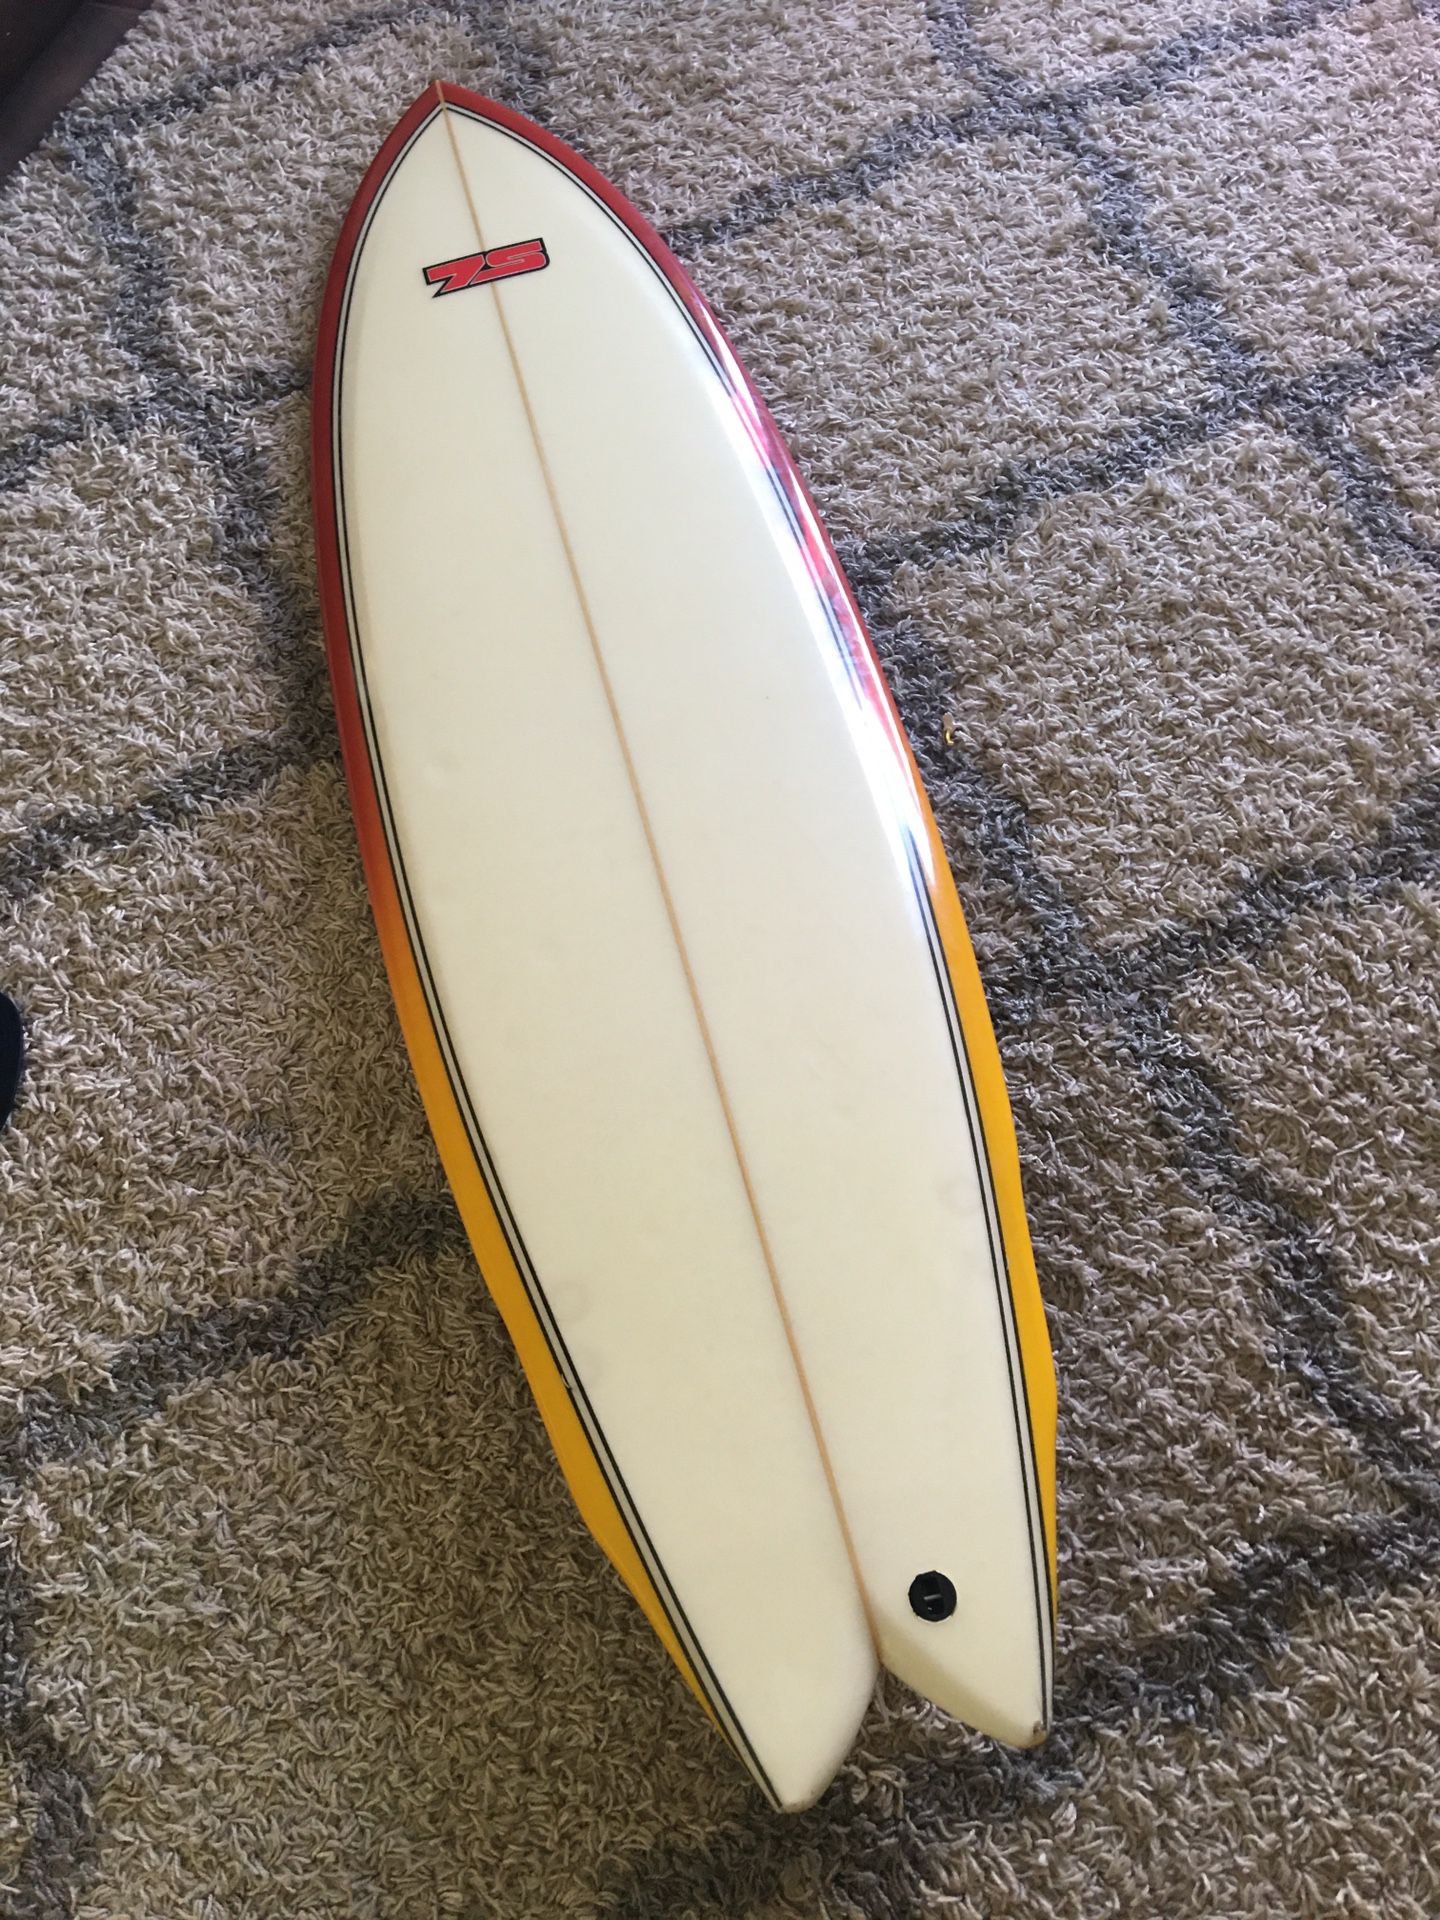 7S 6’2” super fish surfboard great shape ready to surf